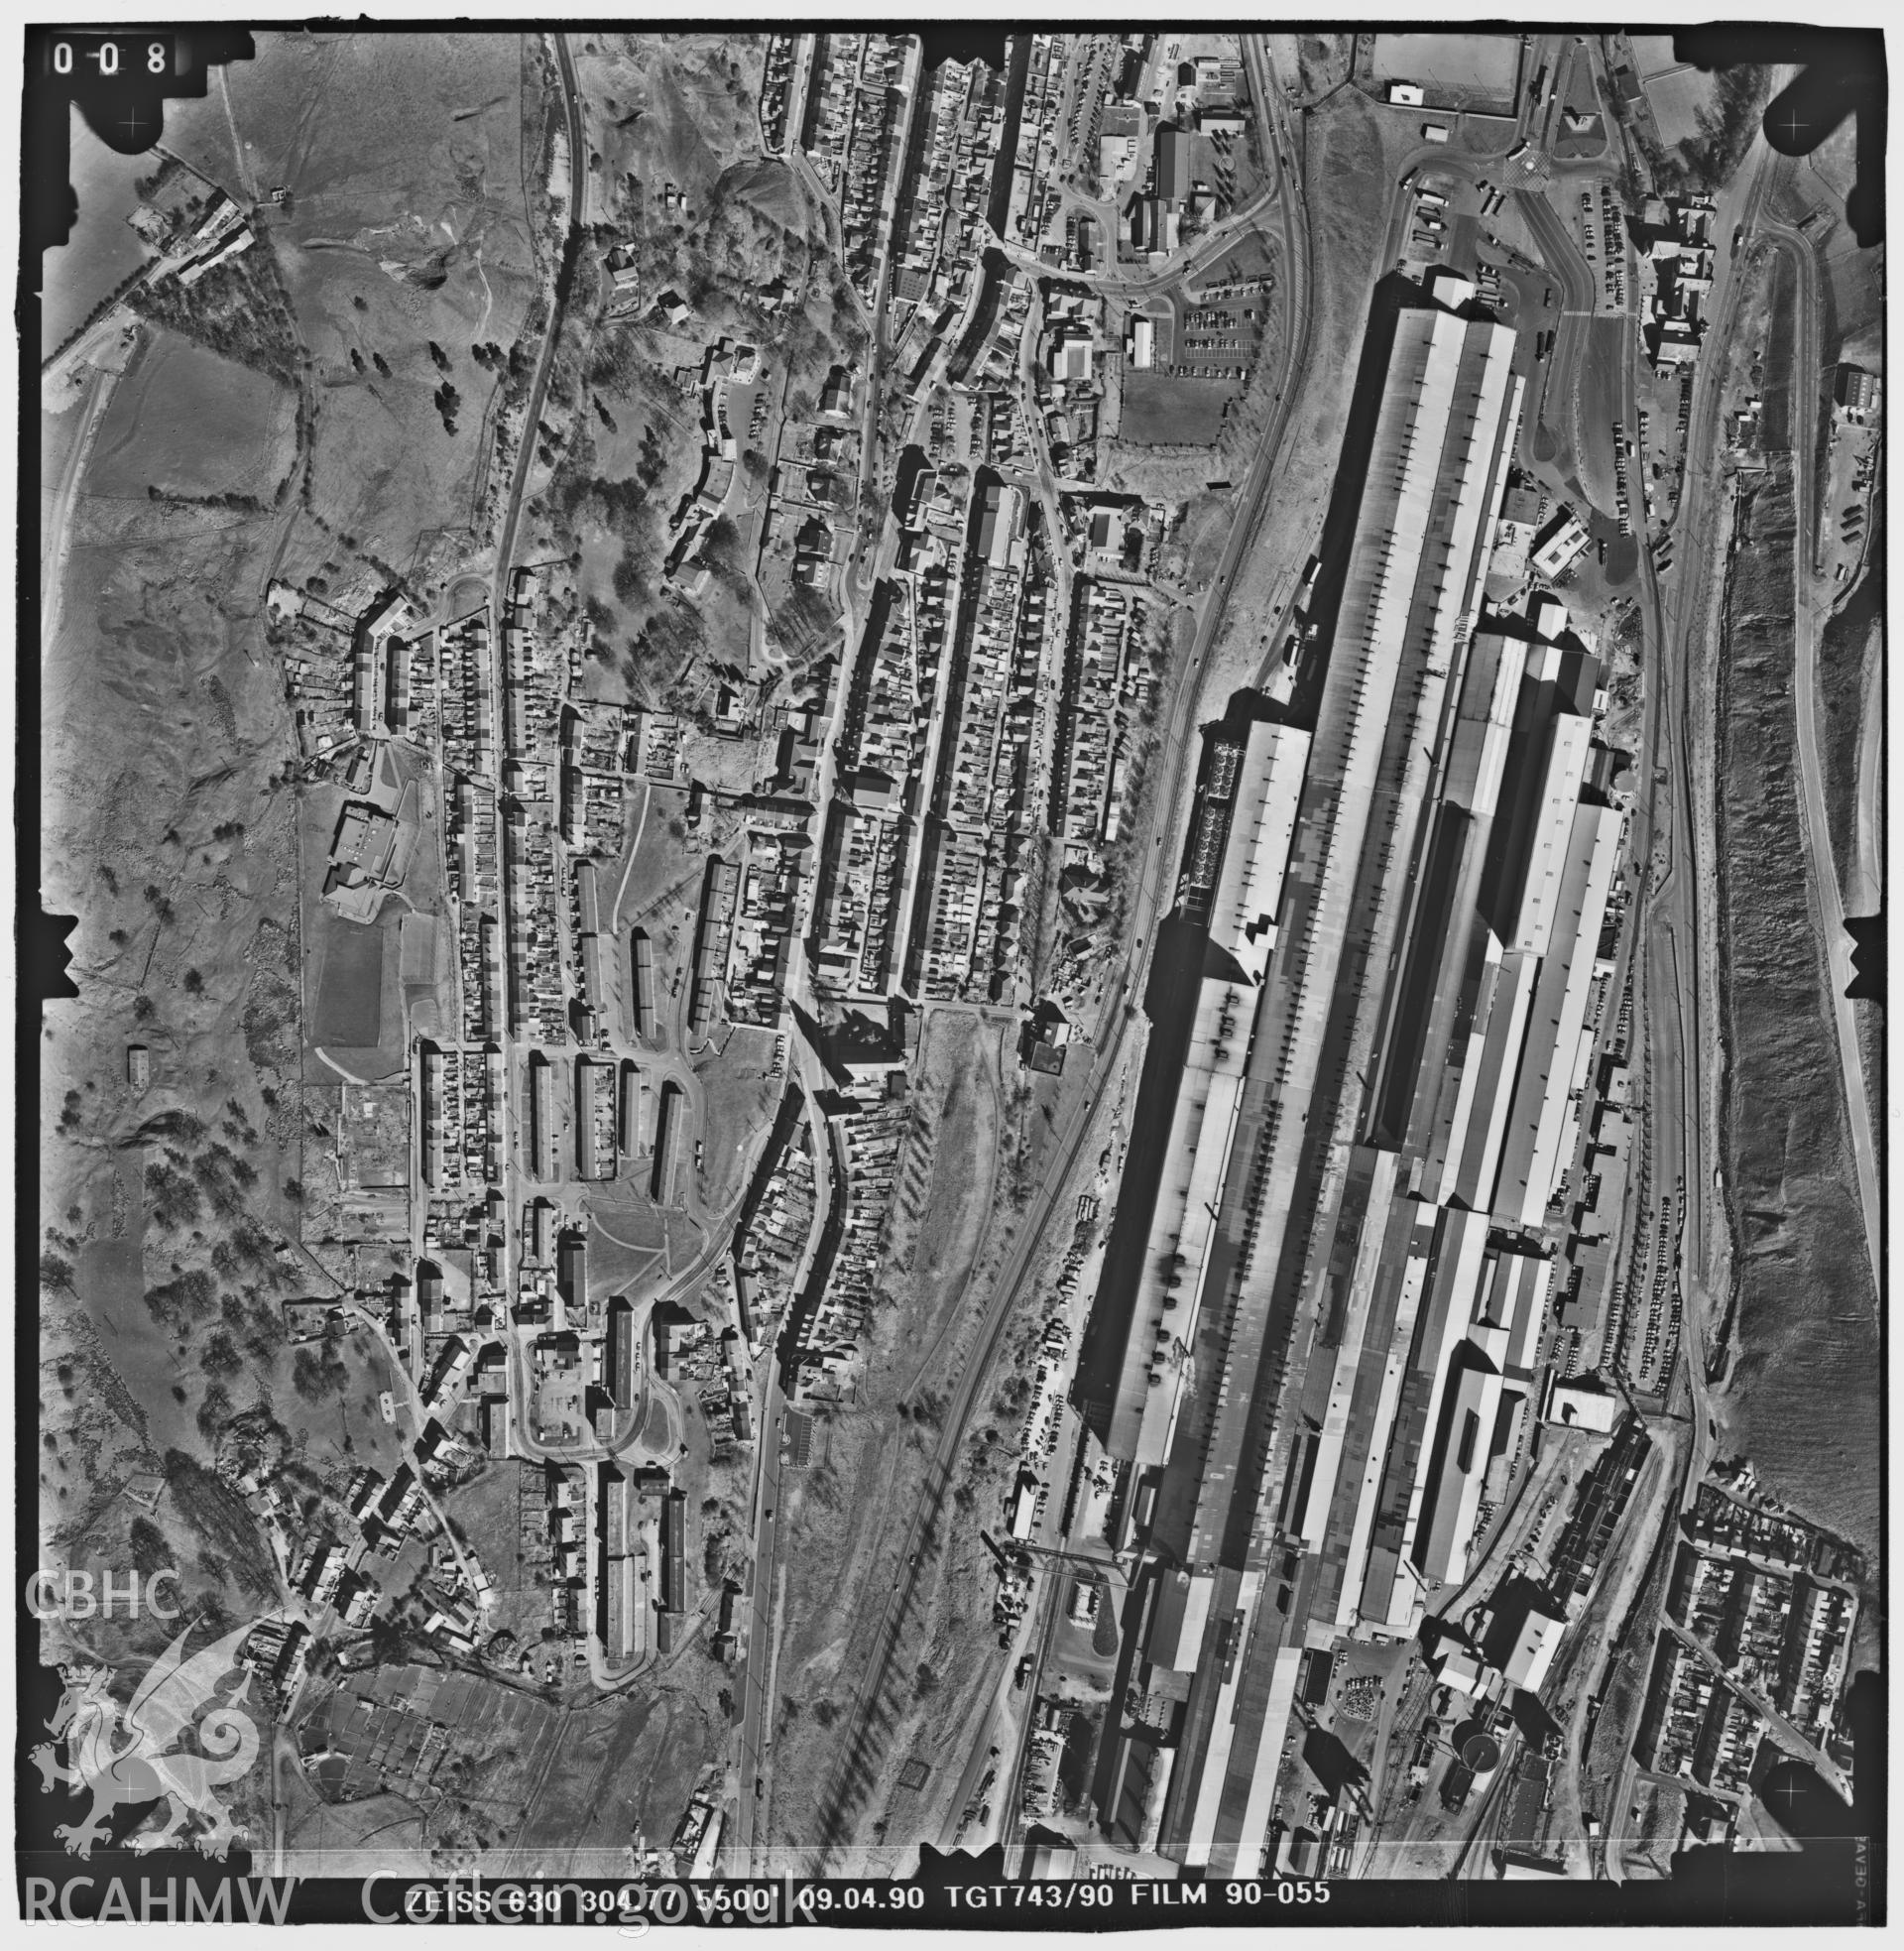 Digitized copy of an aerial photograph showing the Ebbw Vale Steelworks, taken by Ordnance Survey, 1990.